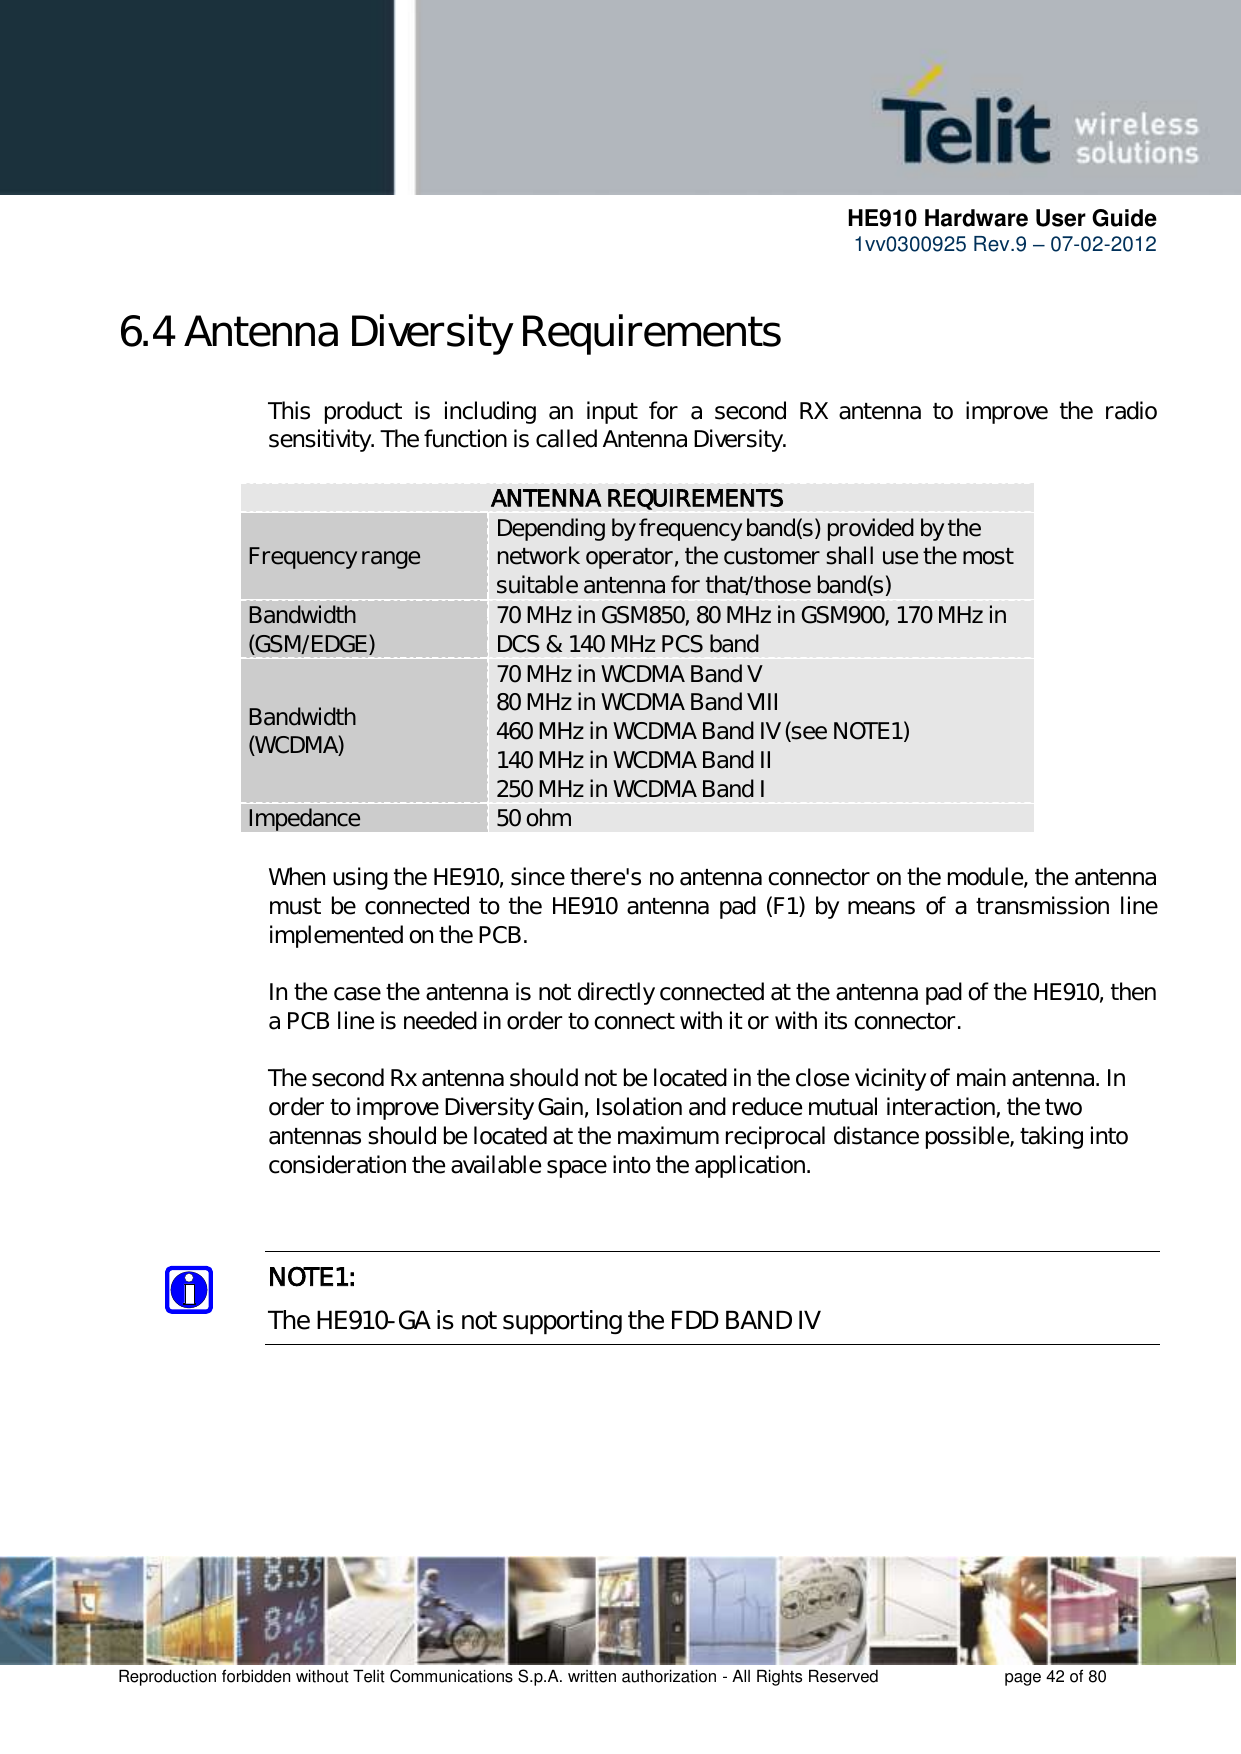      HE910 Hardware User Guide 1vv0300925 Rev.9 – 07-02-2012    Reproduction forbidden without Telit Communications S.p.A. written authorization - All Rights Reserved    page 42 of 80  6.4 Antenna Diversity Requirements This  product  is  including  an  input  for  a  second  RX  antenna  to  improve  the  radio sensitivity. The function is called Antenna Diversity.  ANTENNA REQUIREMENTS Frequency range Depending by frequency band(s) provided by the network operator, the customer shall use the most suitable antenna for that/those band(s) Bandwidth (GSM/EDGE) 70 MHz in GSM850, 80 MHz in GSM900, 170 MHz in DCS &amp; 140 MHz PCS band Bandwidth  (WCDMA) 70 MHz in WCDMA Band V 80 MHz in WCDMA Band VIII 460 MHz in WCDMA Band IV (see NOTE1) 140 MHz in WCDMA Band II 250 MHz in WCDMA Band I Impedance 50 ohm  When using the HE910, since there&apos;s no antenna connector on the module, the antenna must be connected to the HE910 antenna pad (F1) by means of a transmission line implemented on the PCB.  In the case the antenna is not directly connected at the antenna pad of the HE910, then a PCB line is needed in order to connect with it or with its connector.   The second Rx antenna should not be located in the close vicinity of main antenna. In order to improve Diversity Gain, Isolation and reduce mutual interaction, the two antennas should be located at the maximum reciprocal distance possible, taking into consideration the available space into the application.    NOTE1: The HE910-GA is not supporting the FDD BAND IV      